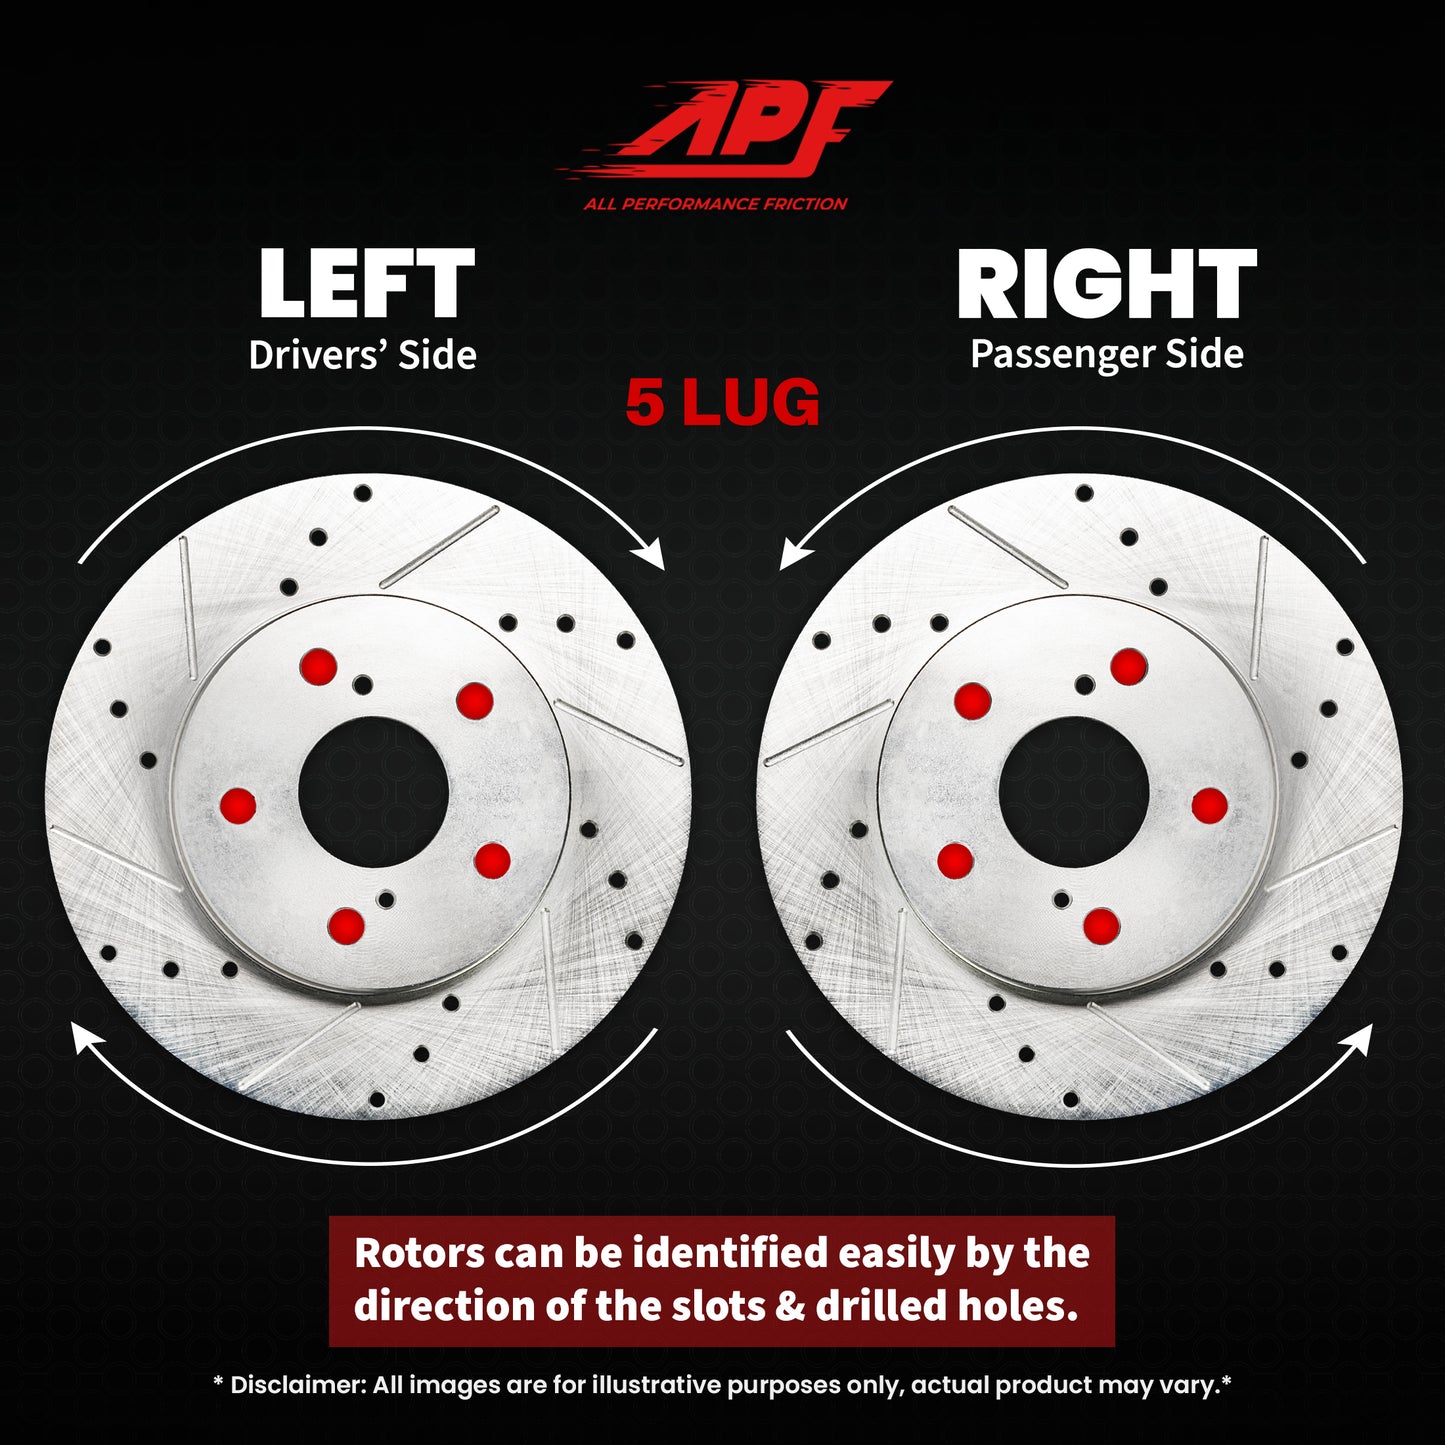 APF All Performance Friction Rear Rotors and Pads Half Kit compatible with Chevrolet Monte Carlo 1995-1999 Zinc Drilled Slotted Rotors with Ceramic Carbon Fiber Brake Pads | $179.54